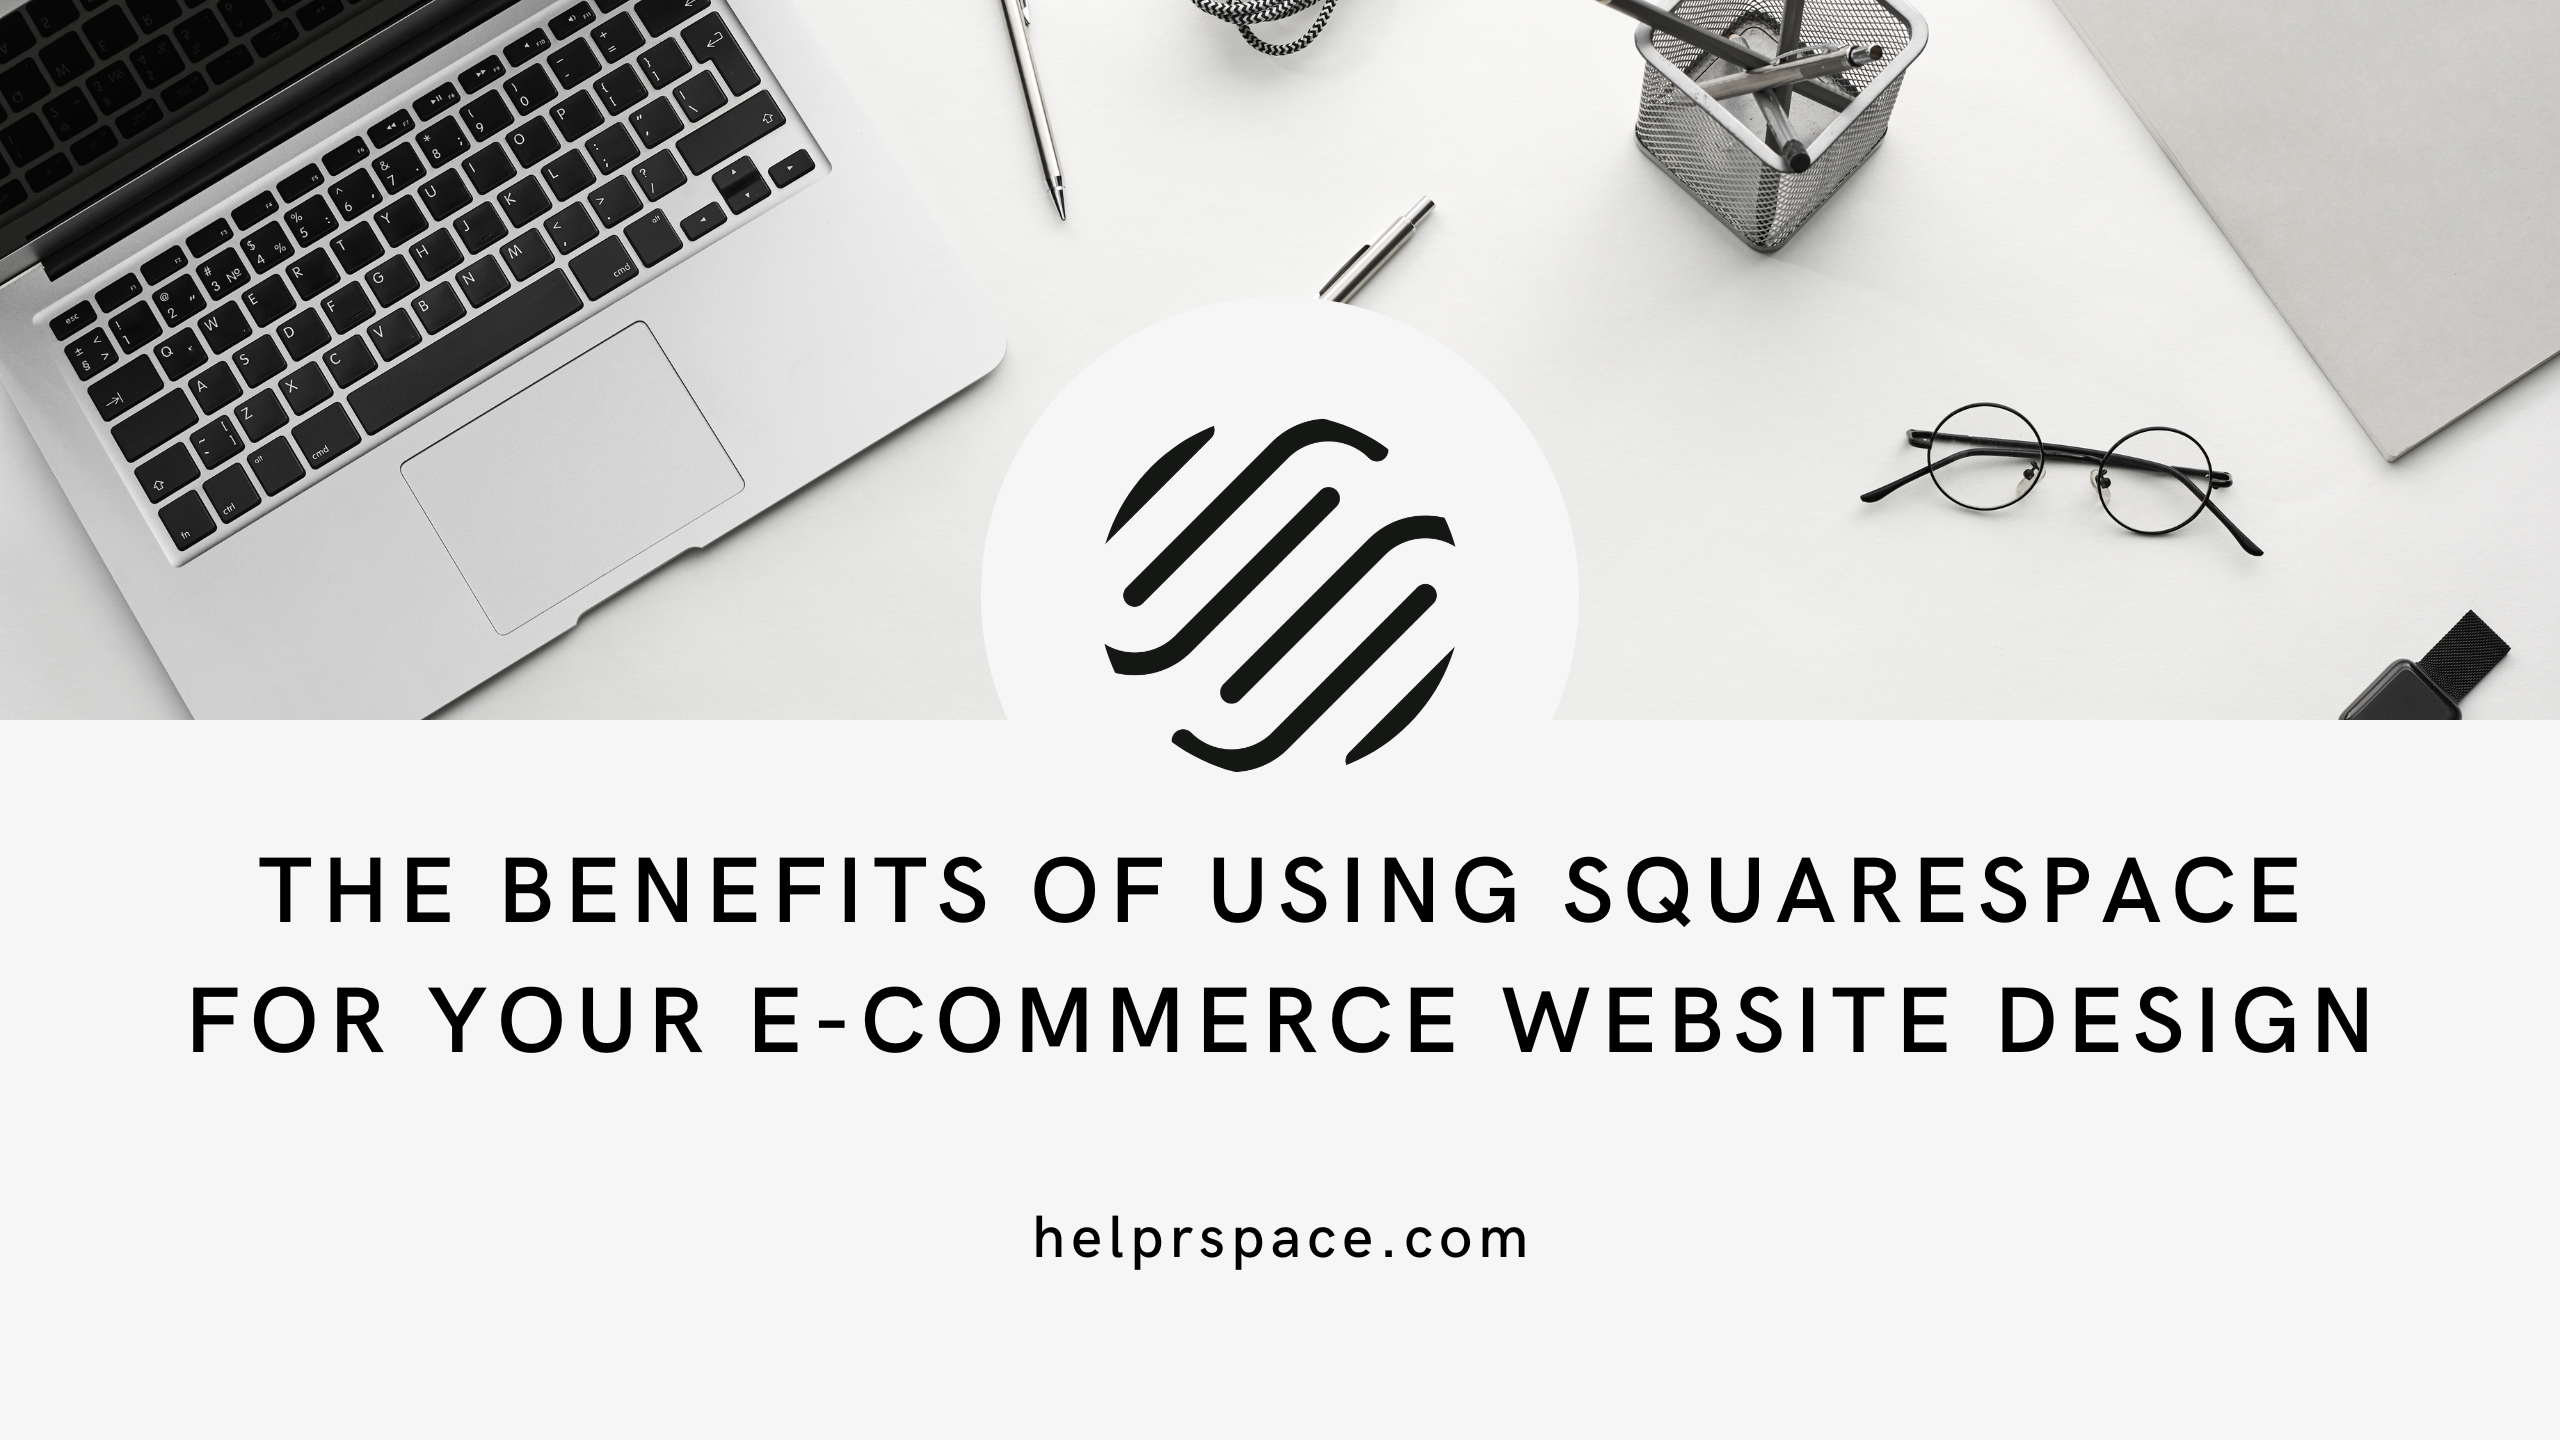 The Benefits of Using Squarespace for Your E-Commerce Website Design